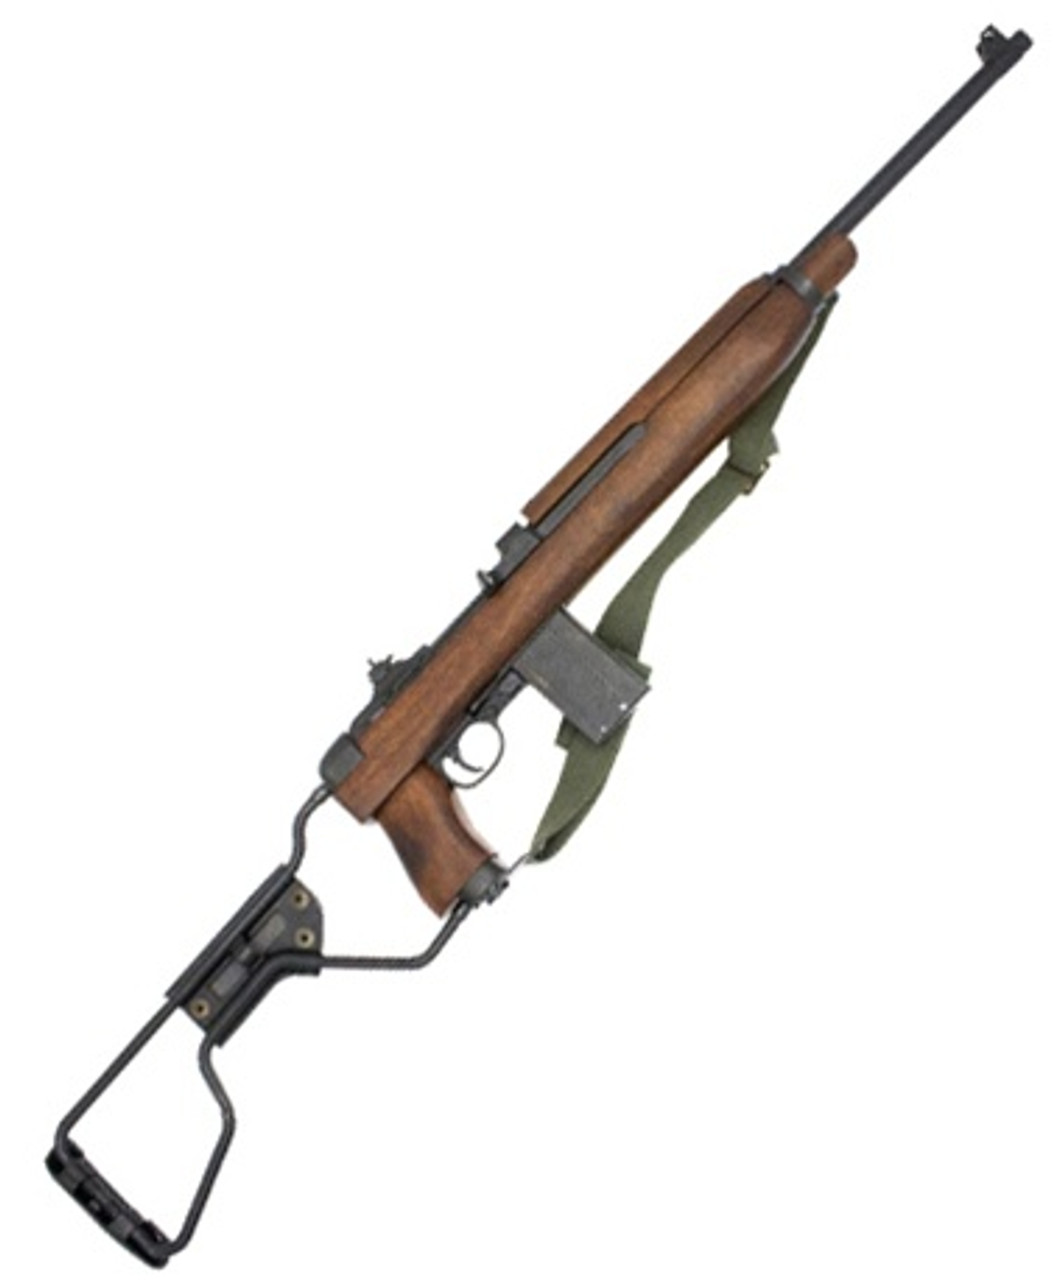 M1A1 Carbine - Paratrooper Model from Hessen Antique